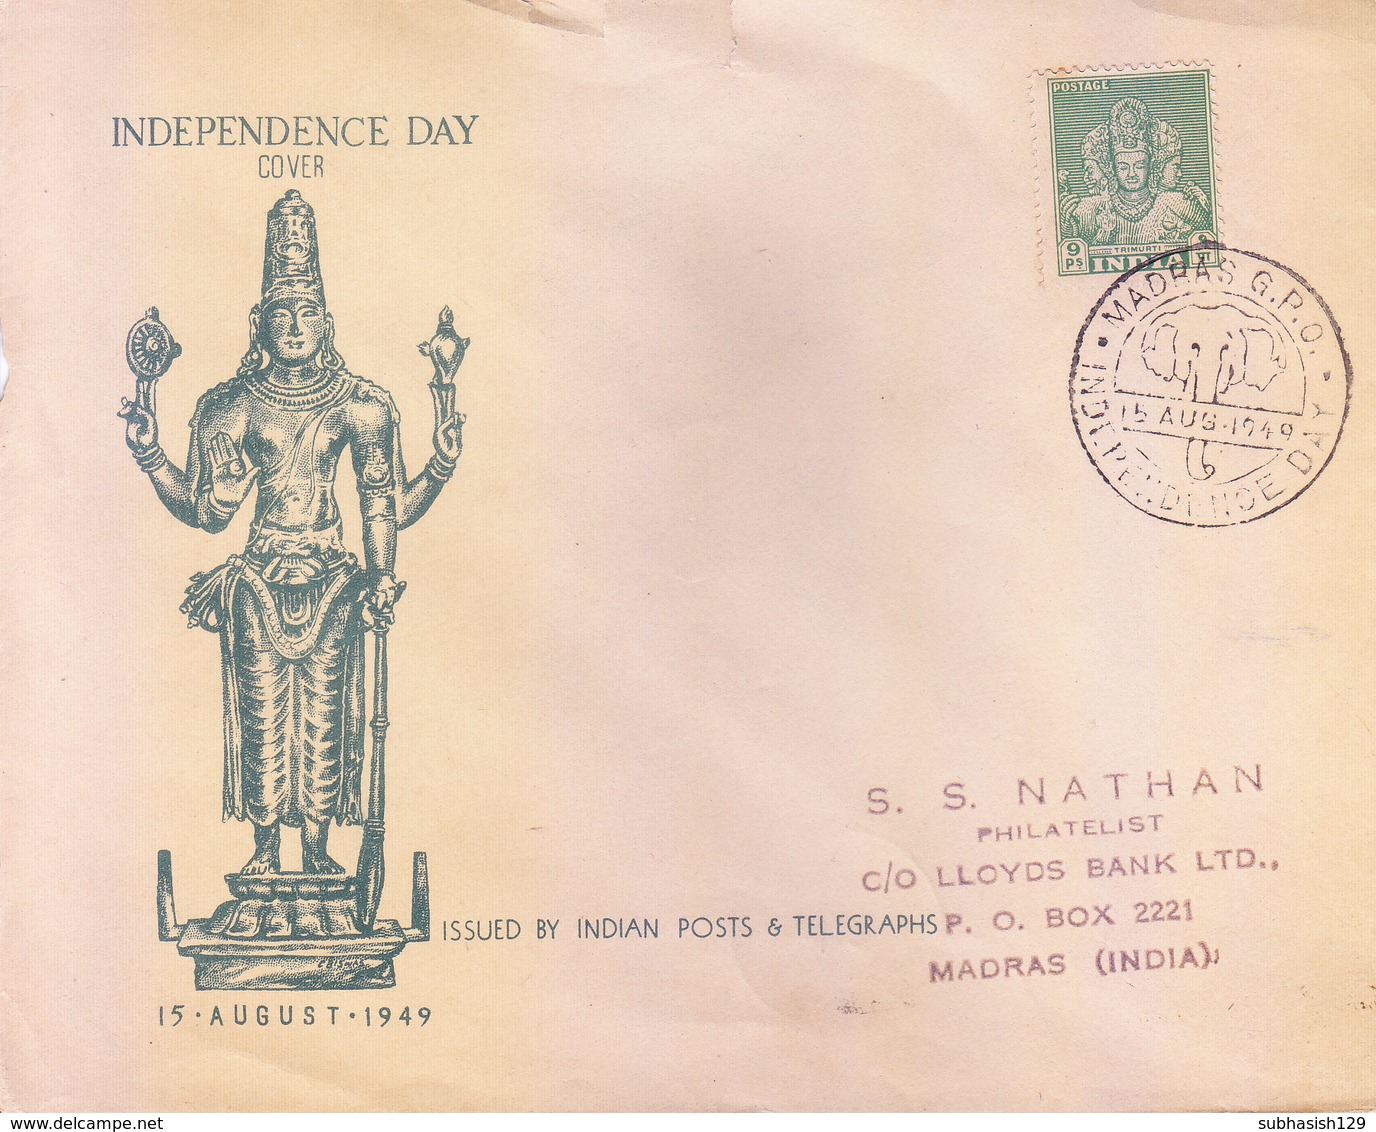 INDIA - FIRST DAY COVER 15.08.1949 - ARCHAEOLOGICAL SERIES - 9 PIES - TRIMURTI - COMMERCIALLY USED - Covers & Documents